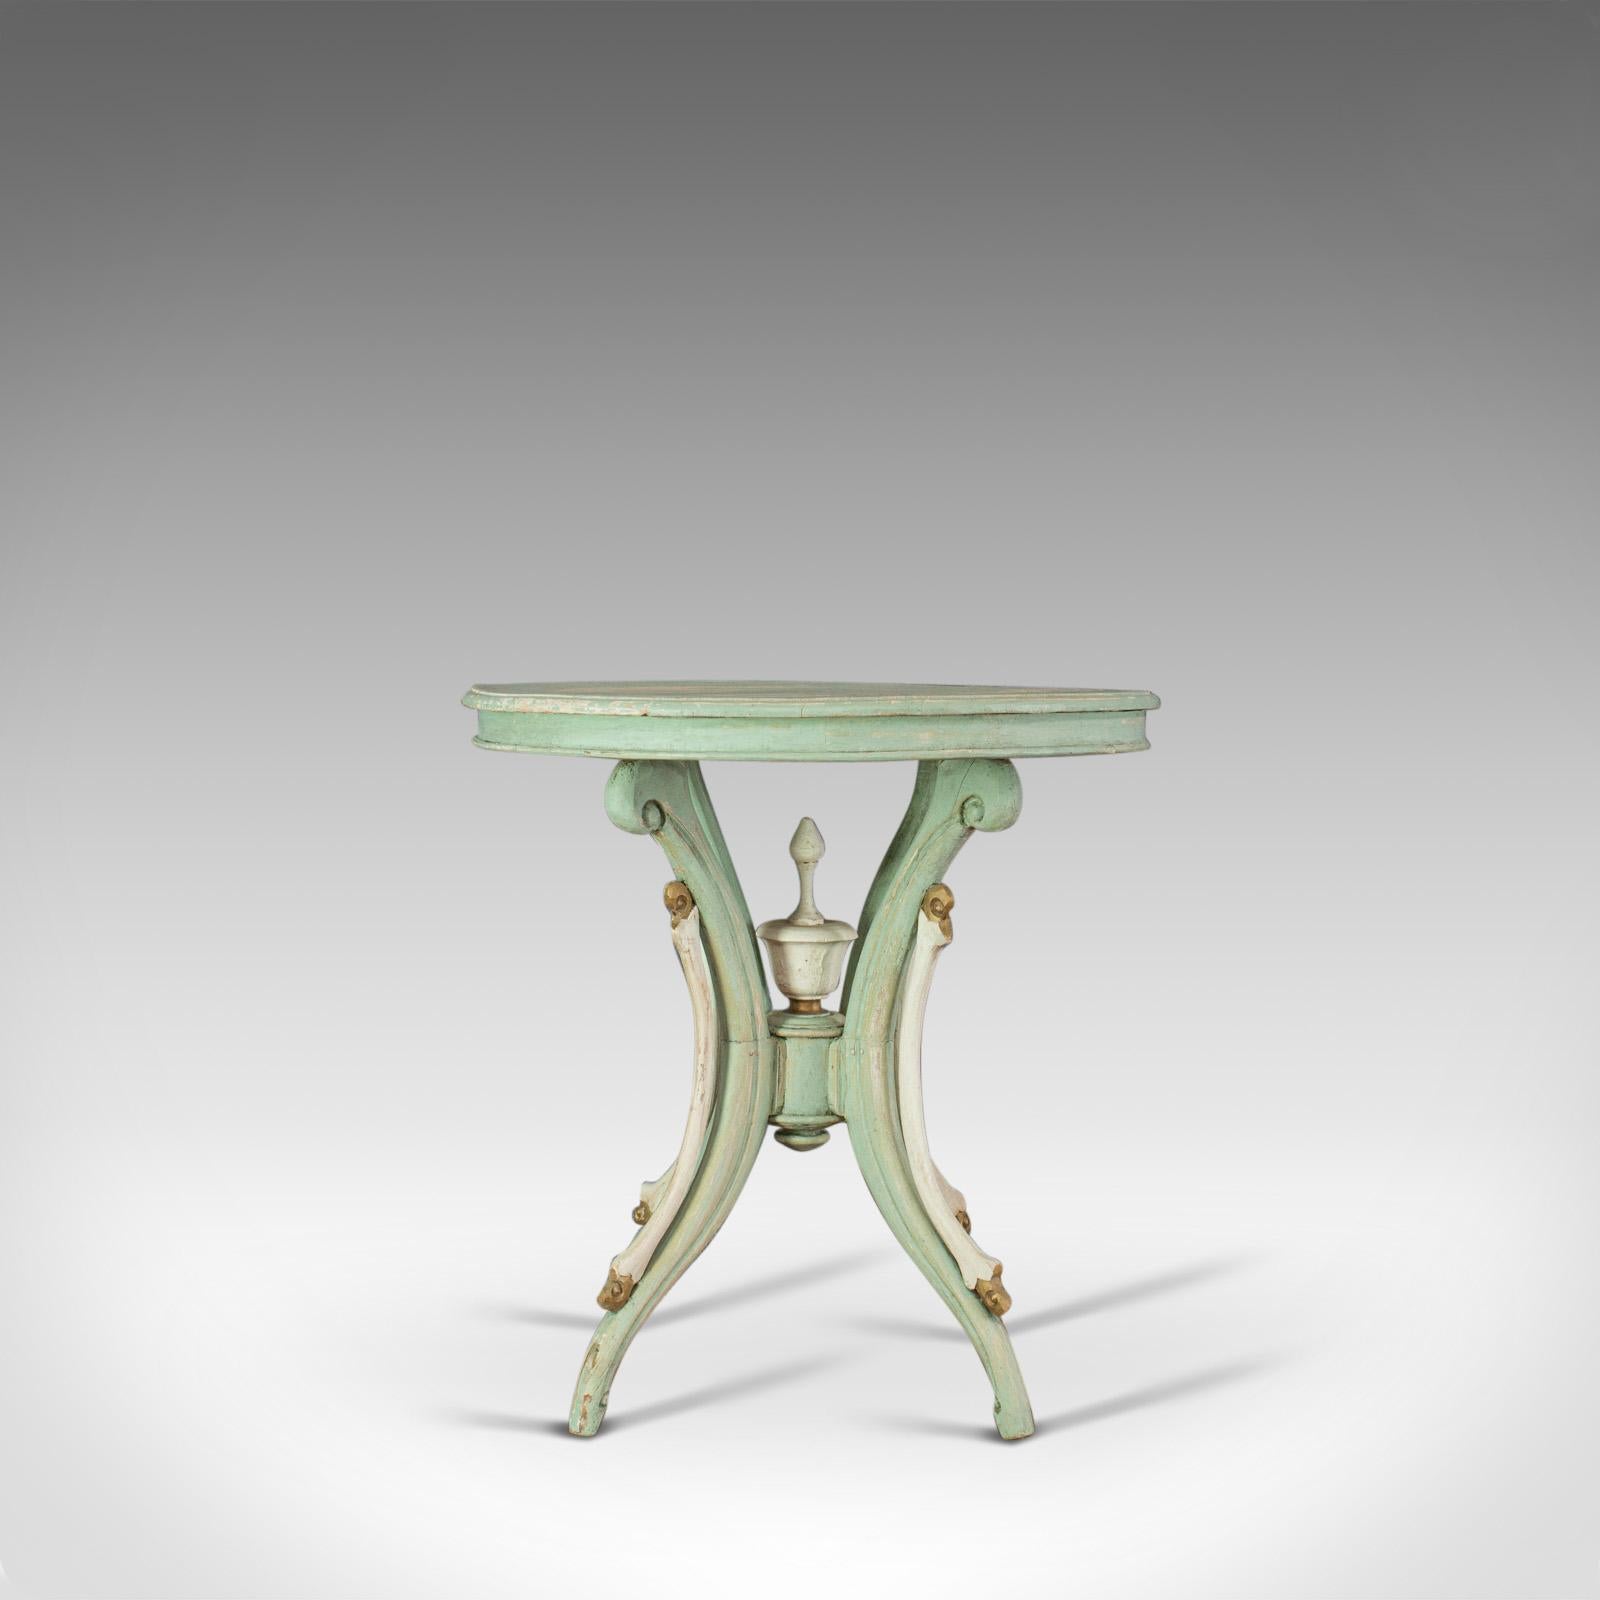 Victorian Antique Side Table, French, Painted, Pine, Cafe, Lamp, Occasional, circa 1890